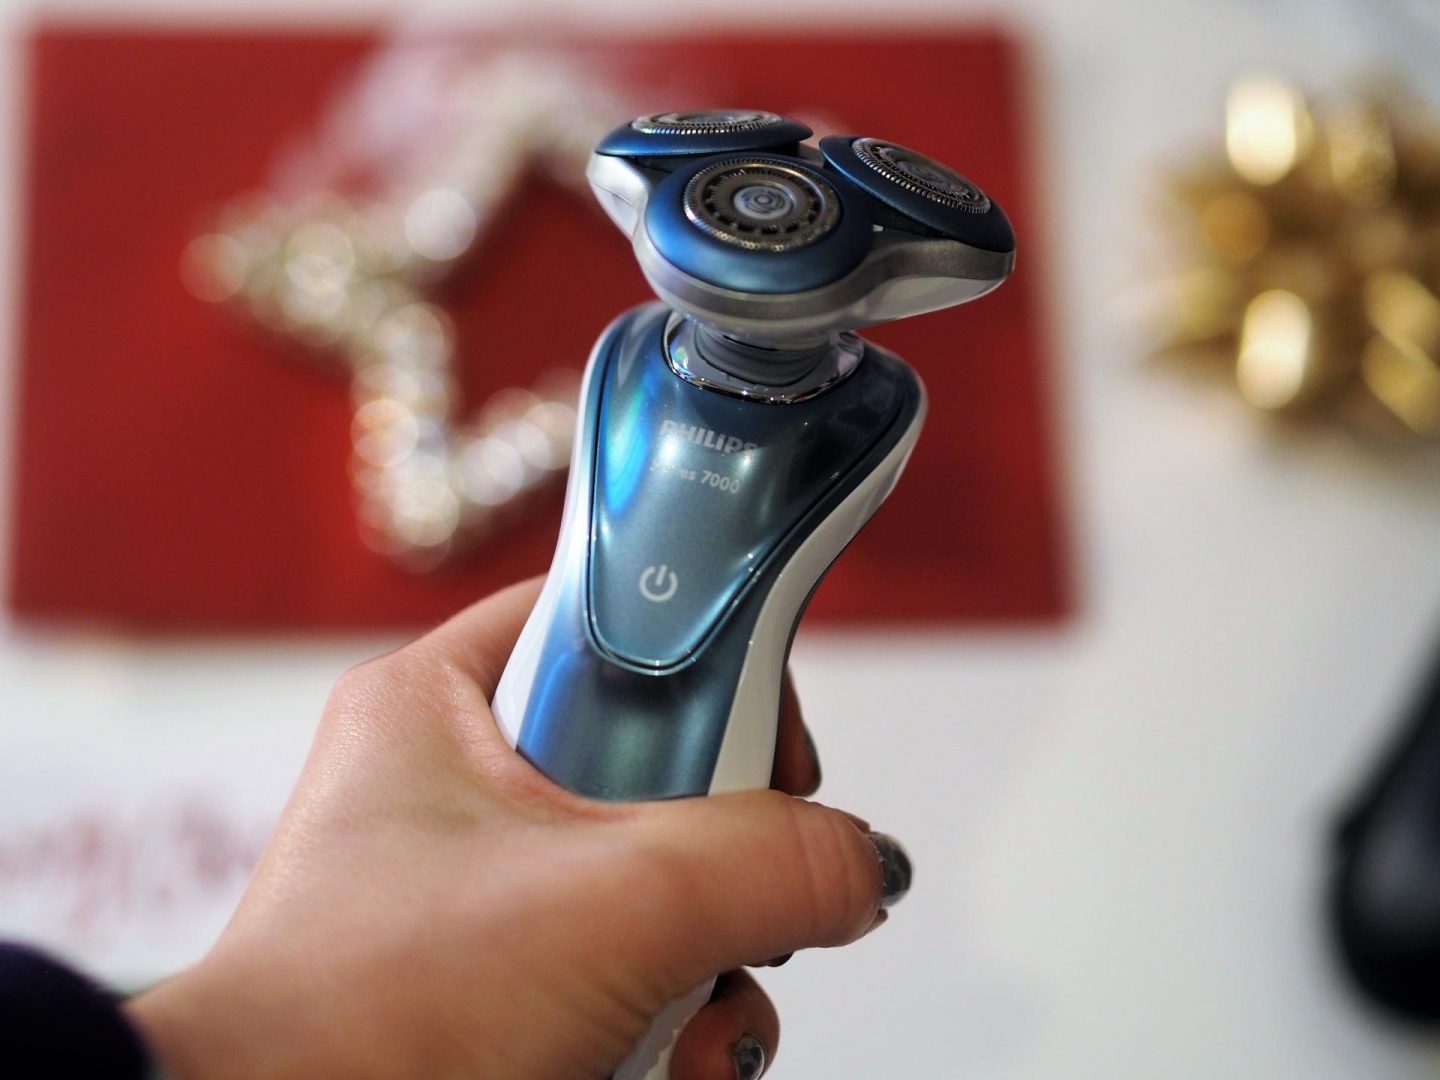 Philips Wet/Dry Shaver Series 7000 and Christmas Gift Guide for Him